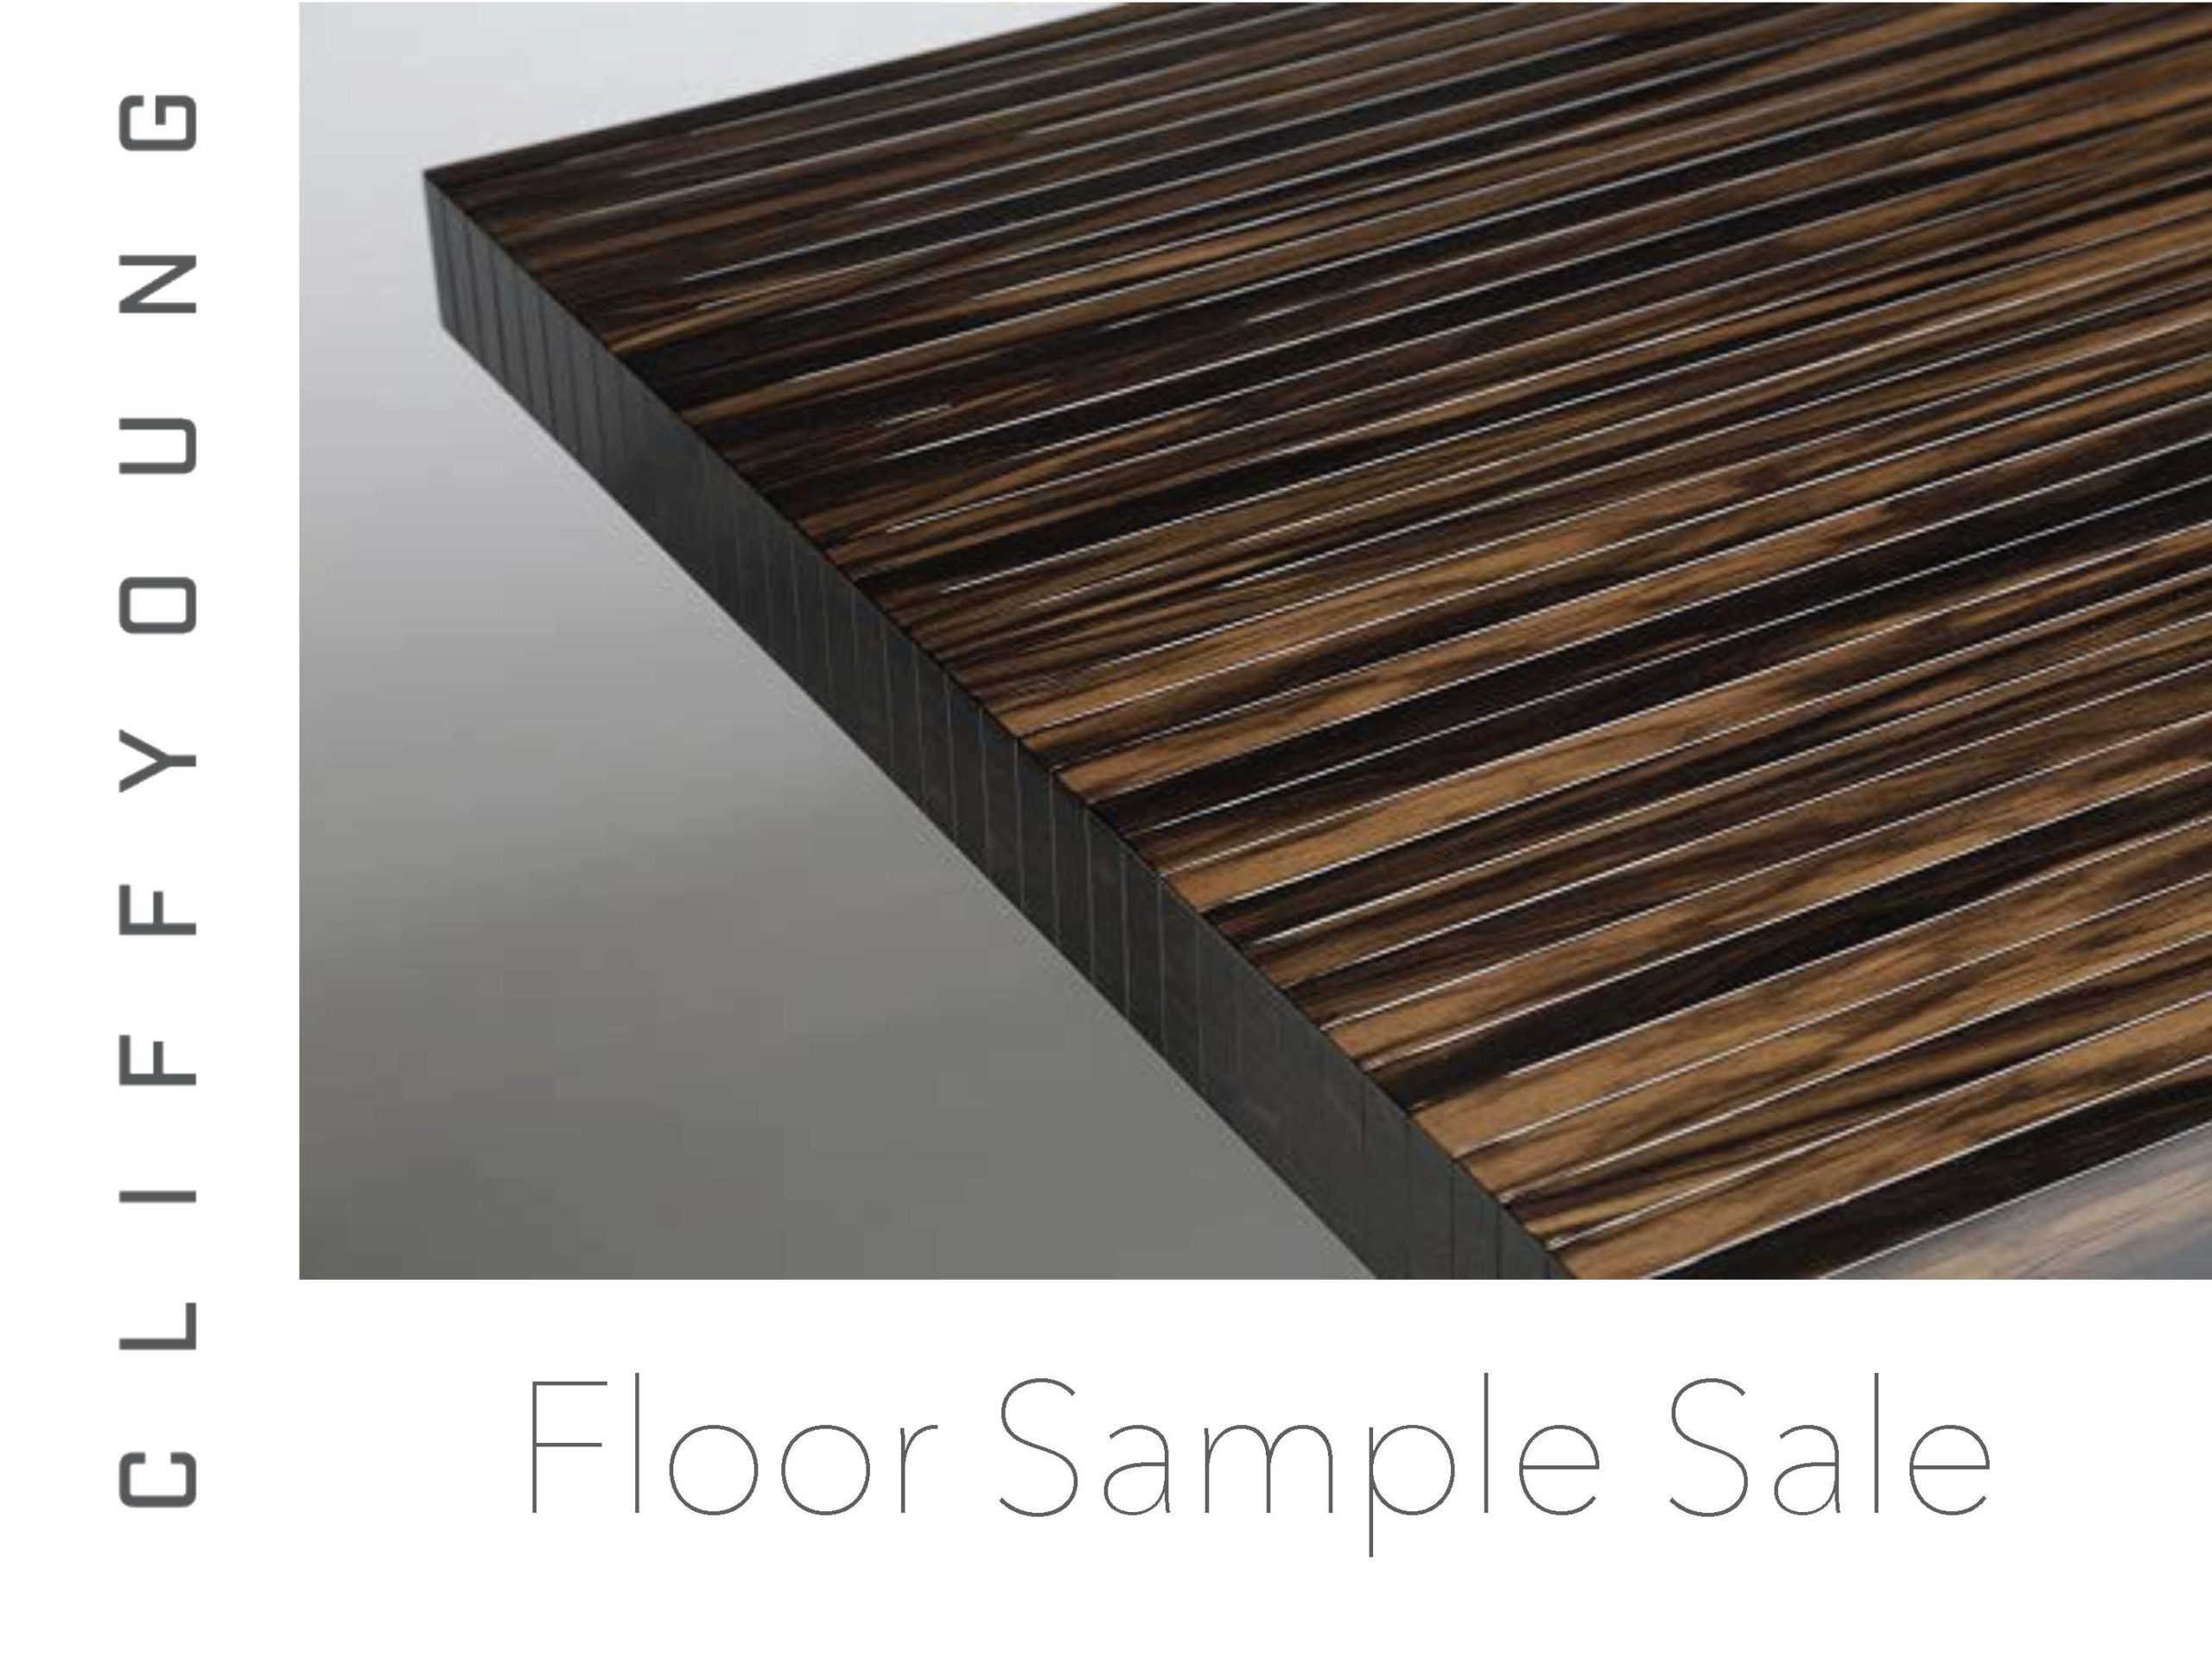 Cliff Young Ltd Catalog_Floor Sample Sale 2020 Cover